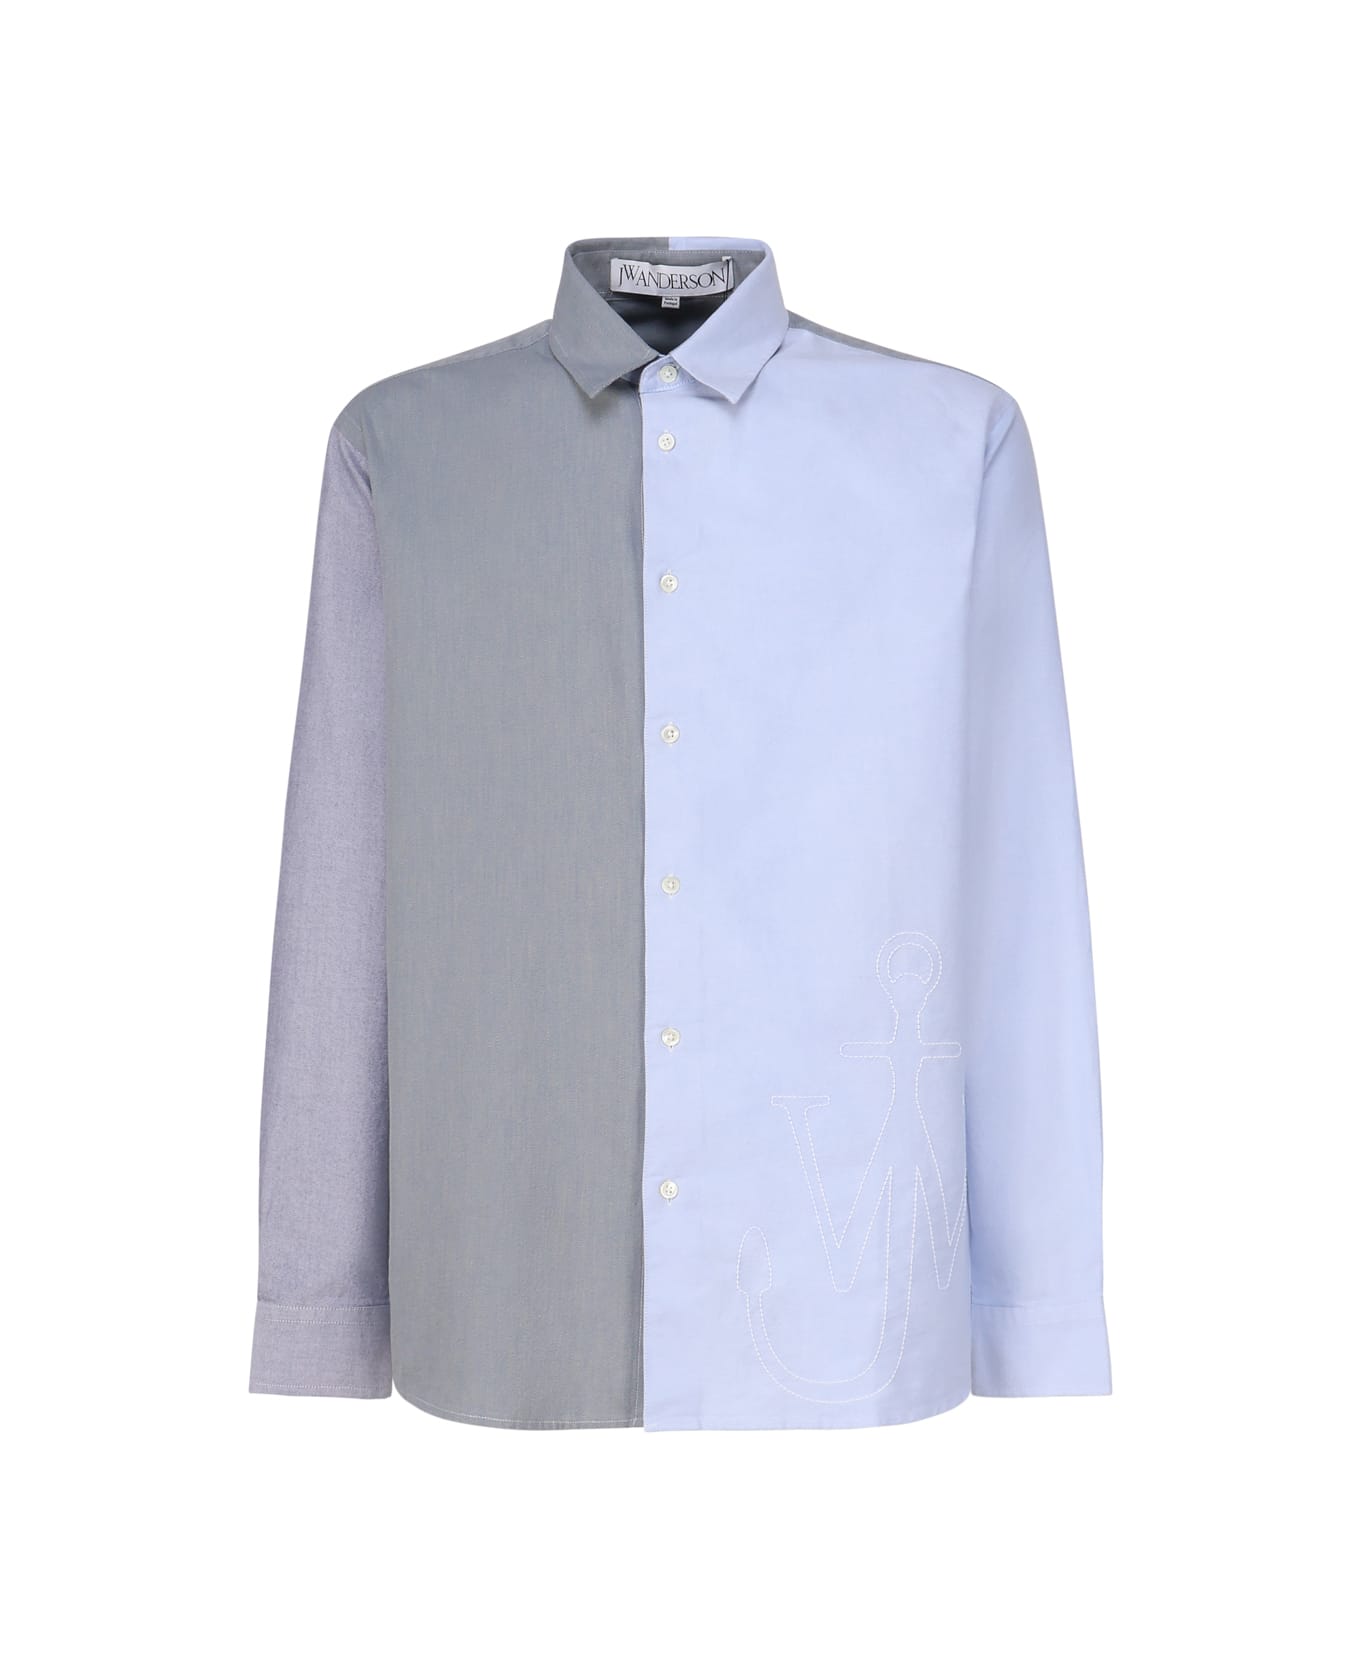 J.W. Anderson Patchwork Shirt With Anchor Embroidery - Grey, light blue